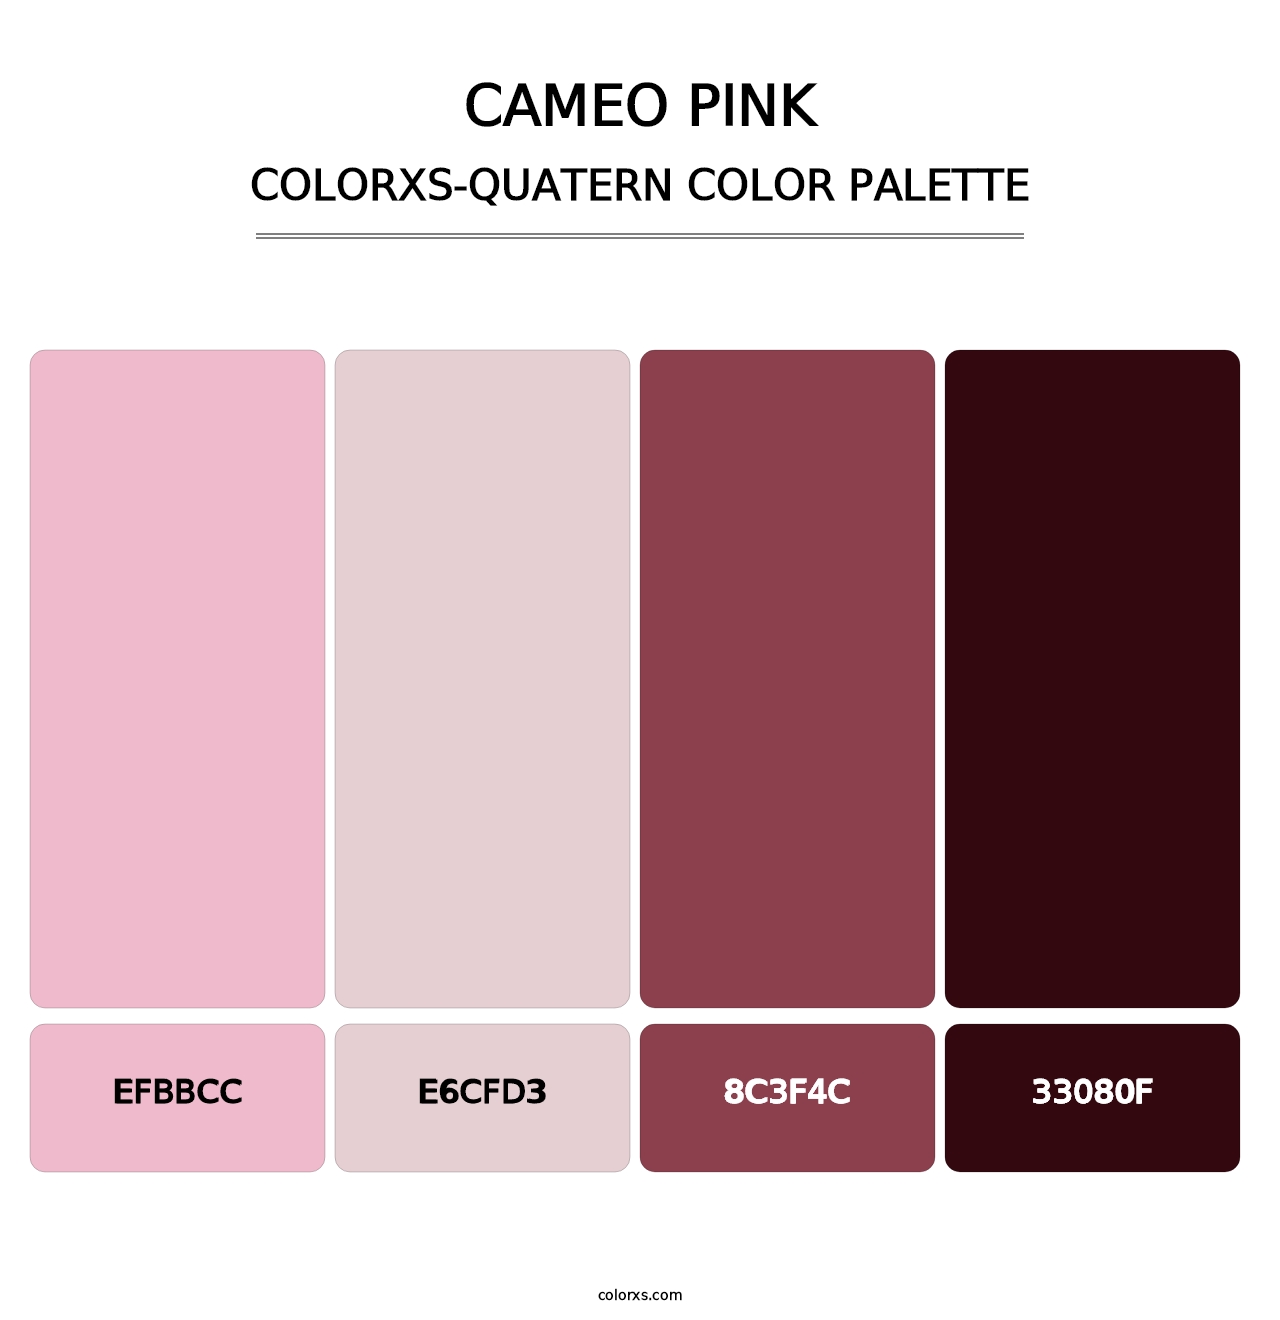 Cameo Pink - Colorxs Quatern Palette